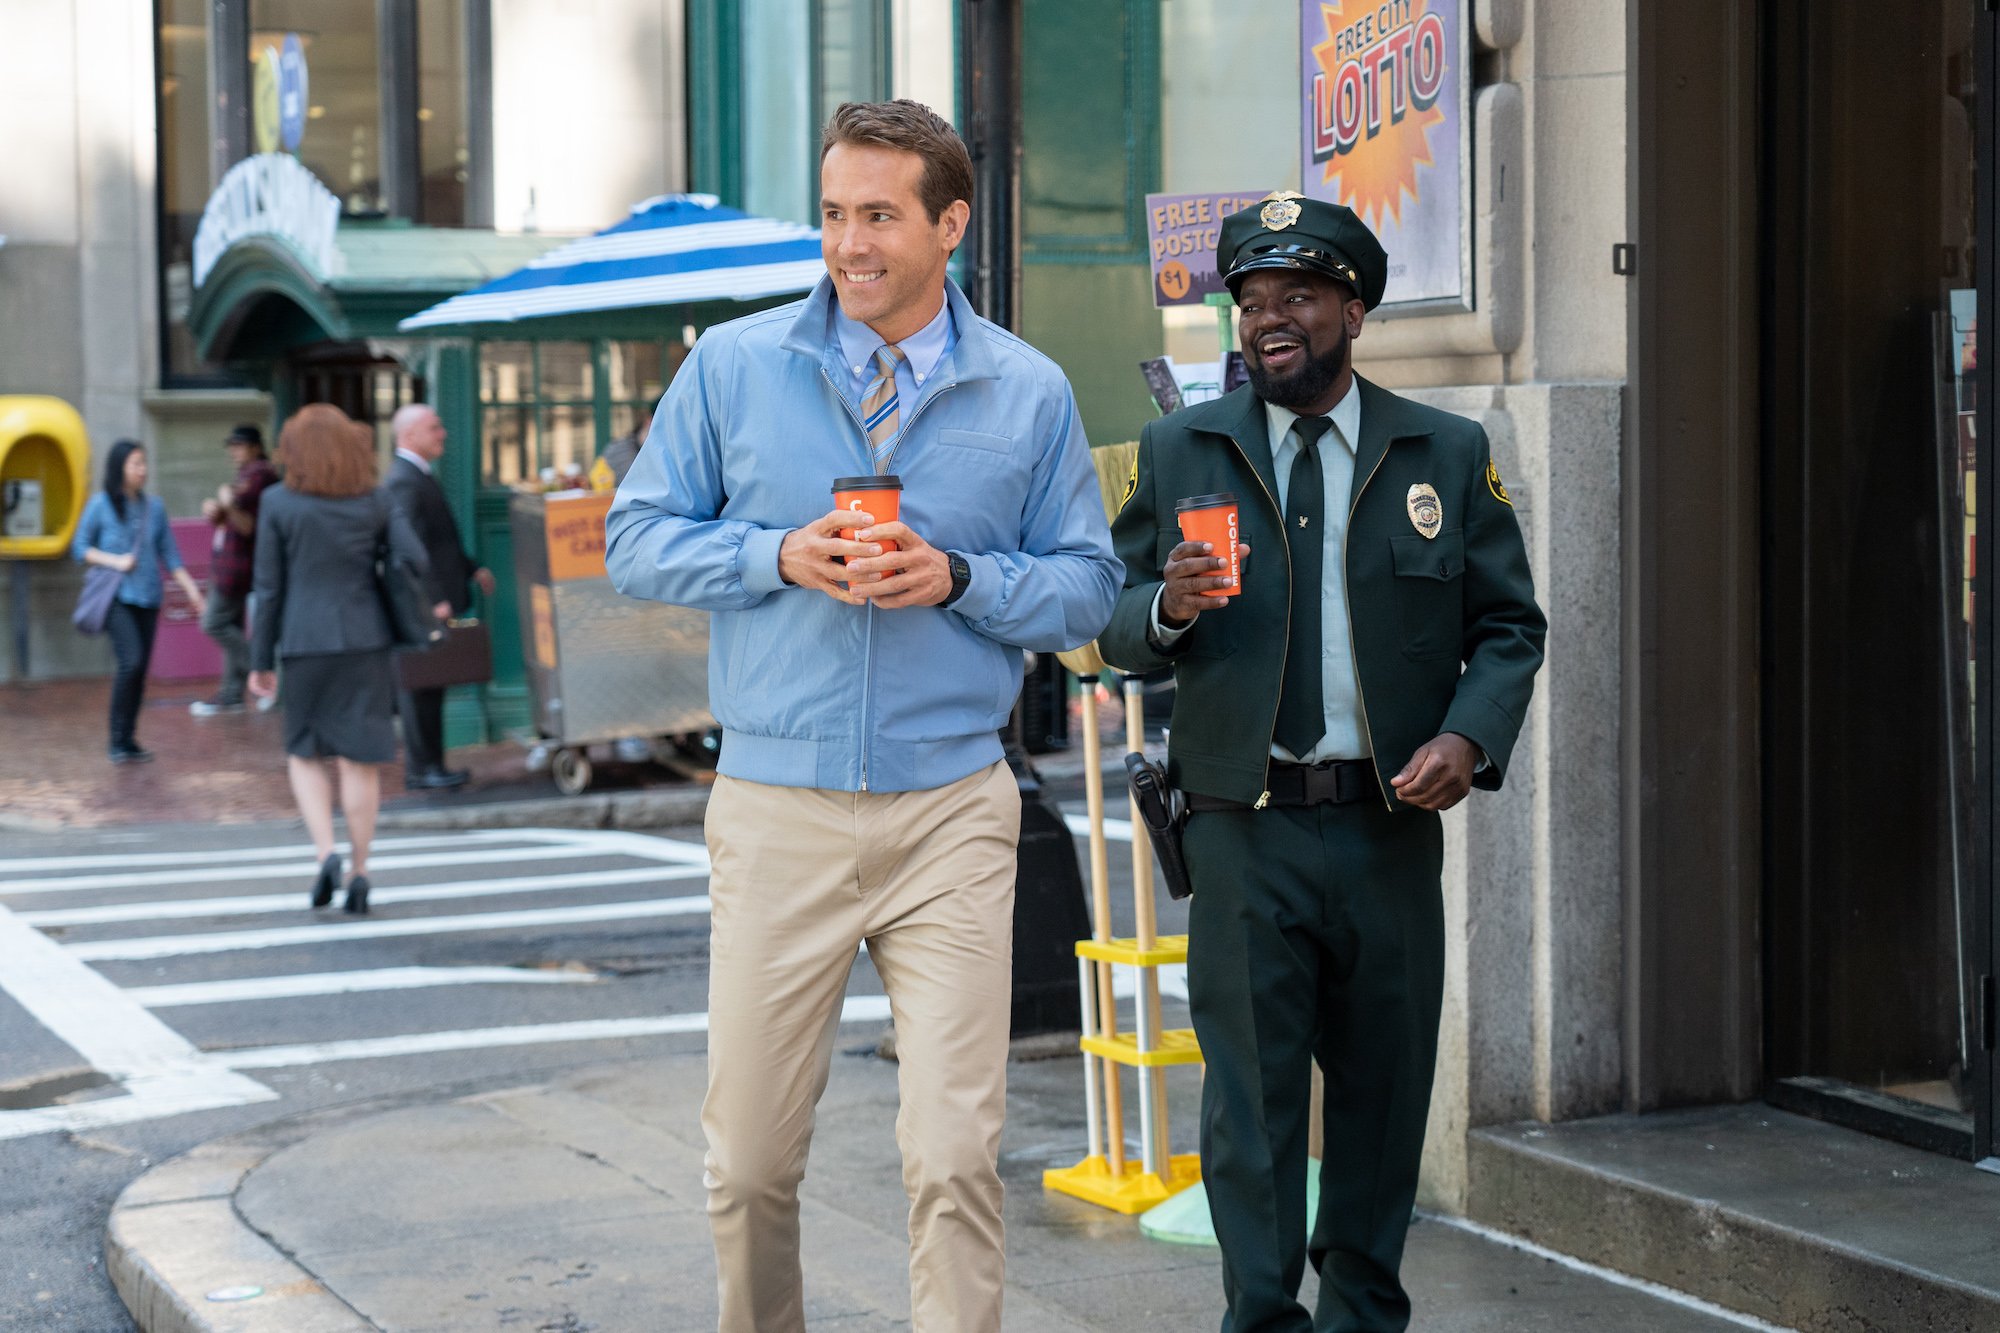 Free Guy: Ryan Reynolds and Lil Rel Howery walk down the street